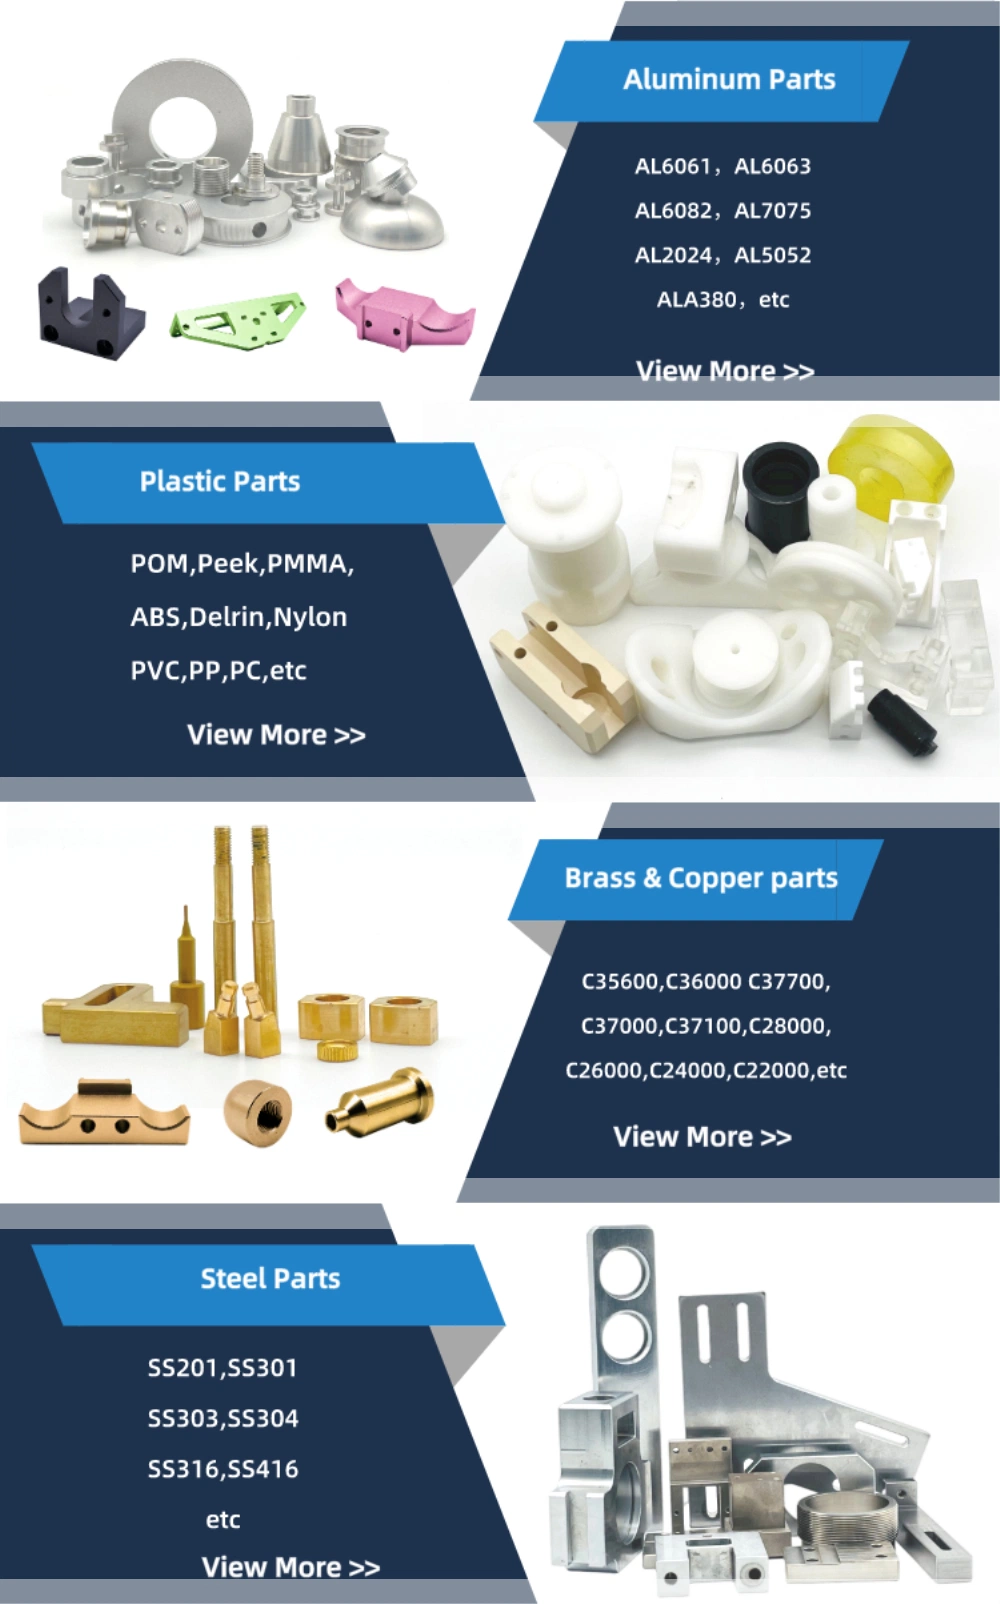 Custom-Made High-Precision CNC Machining Spare Parts, Using Laser Cutting and CNC Milling and Turning Metal Parts